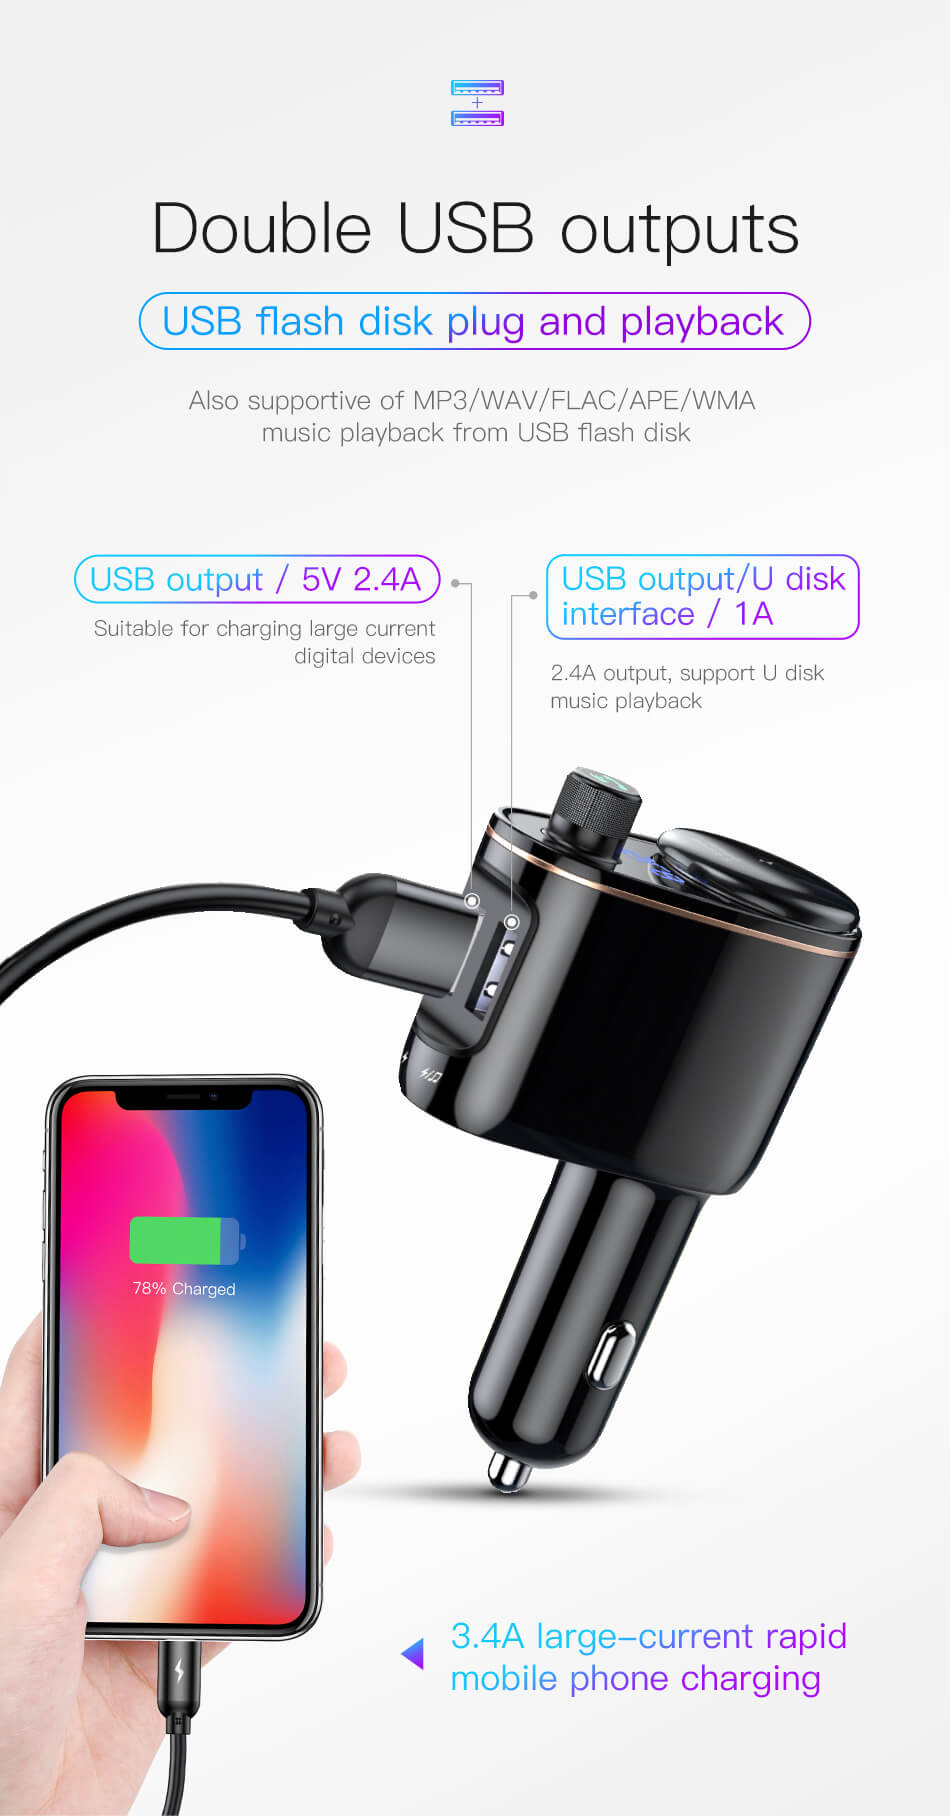 Baseus 3.4A Dual USB Car Charger For iPhone Bluetooth FM Transmitter Car Kit MP3 Player FM Modulator Fast Mobile Phone Charger